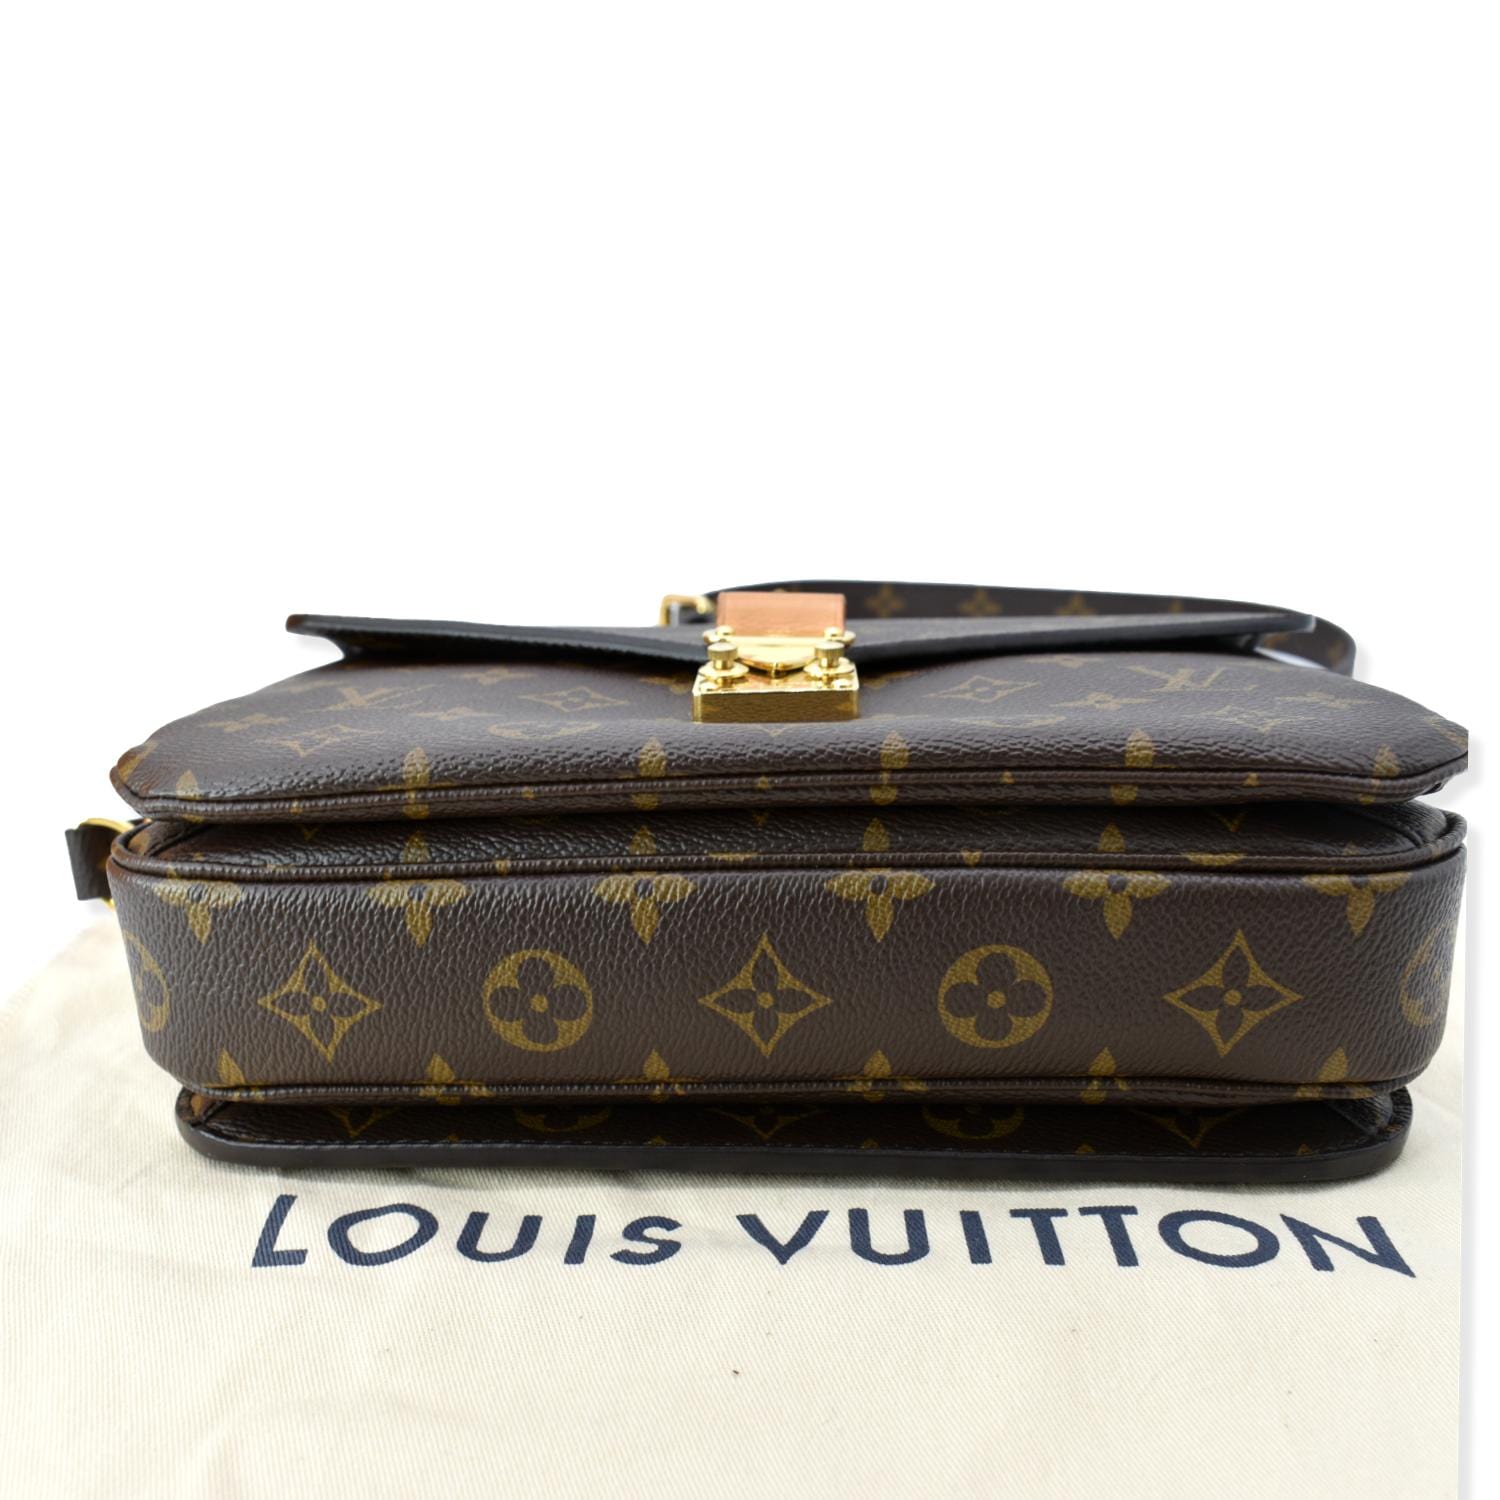 Metis leather crossbody bag Louis Vuitton Brown in Leather - 36209622